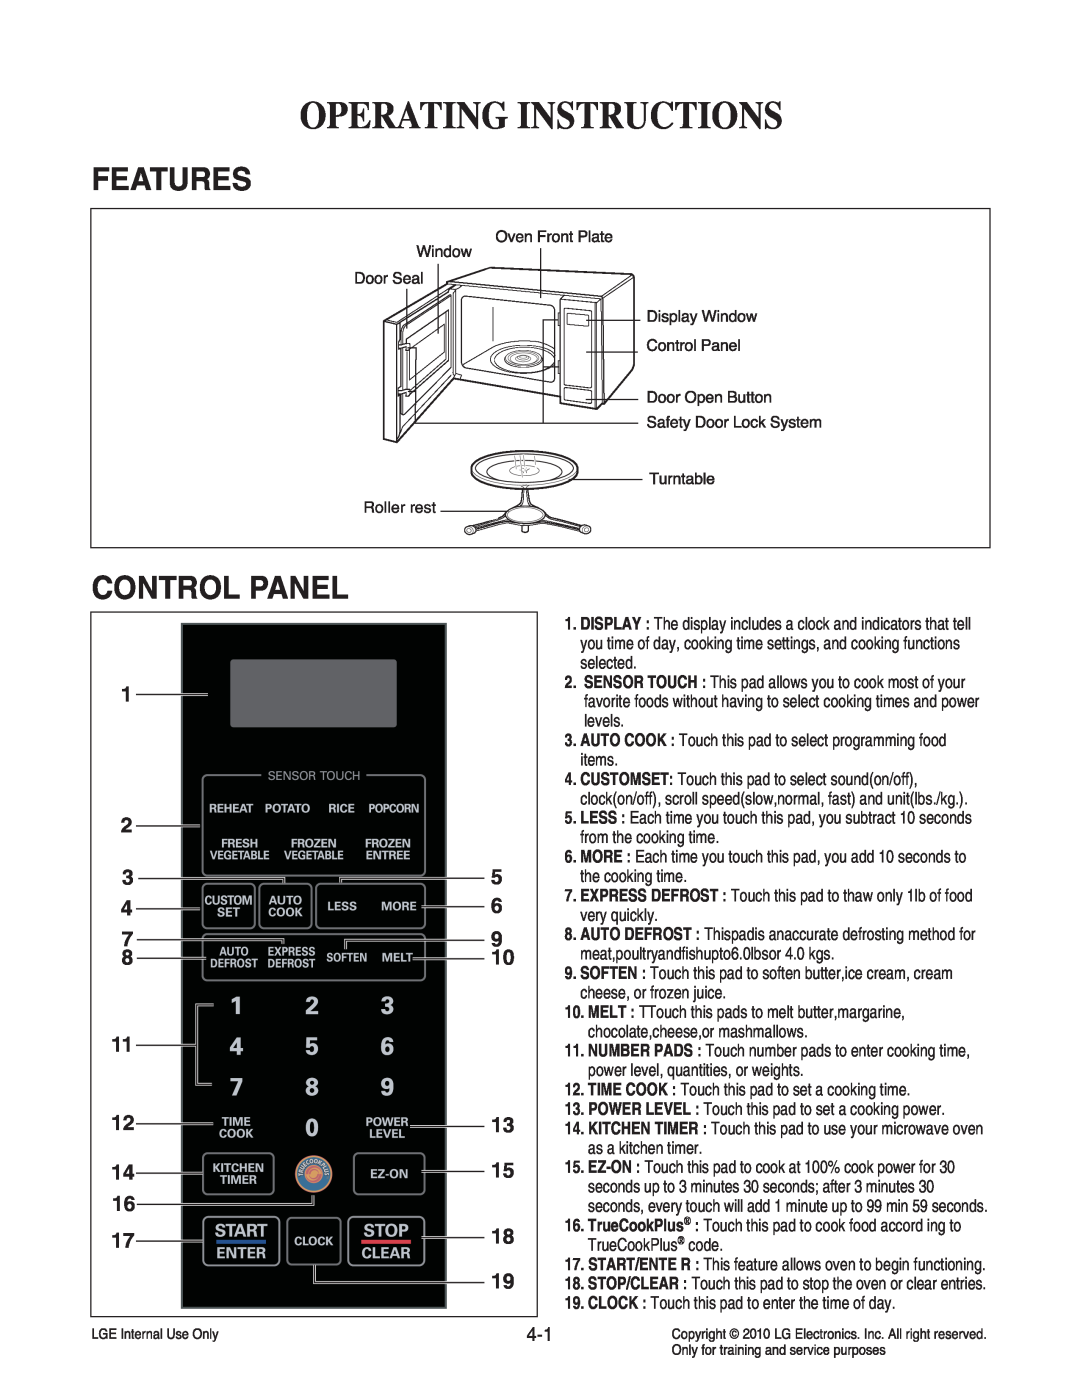 Frigidaire LCRT2010ST service manual Operating Instructions, Features, Control Panel 